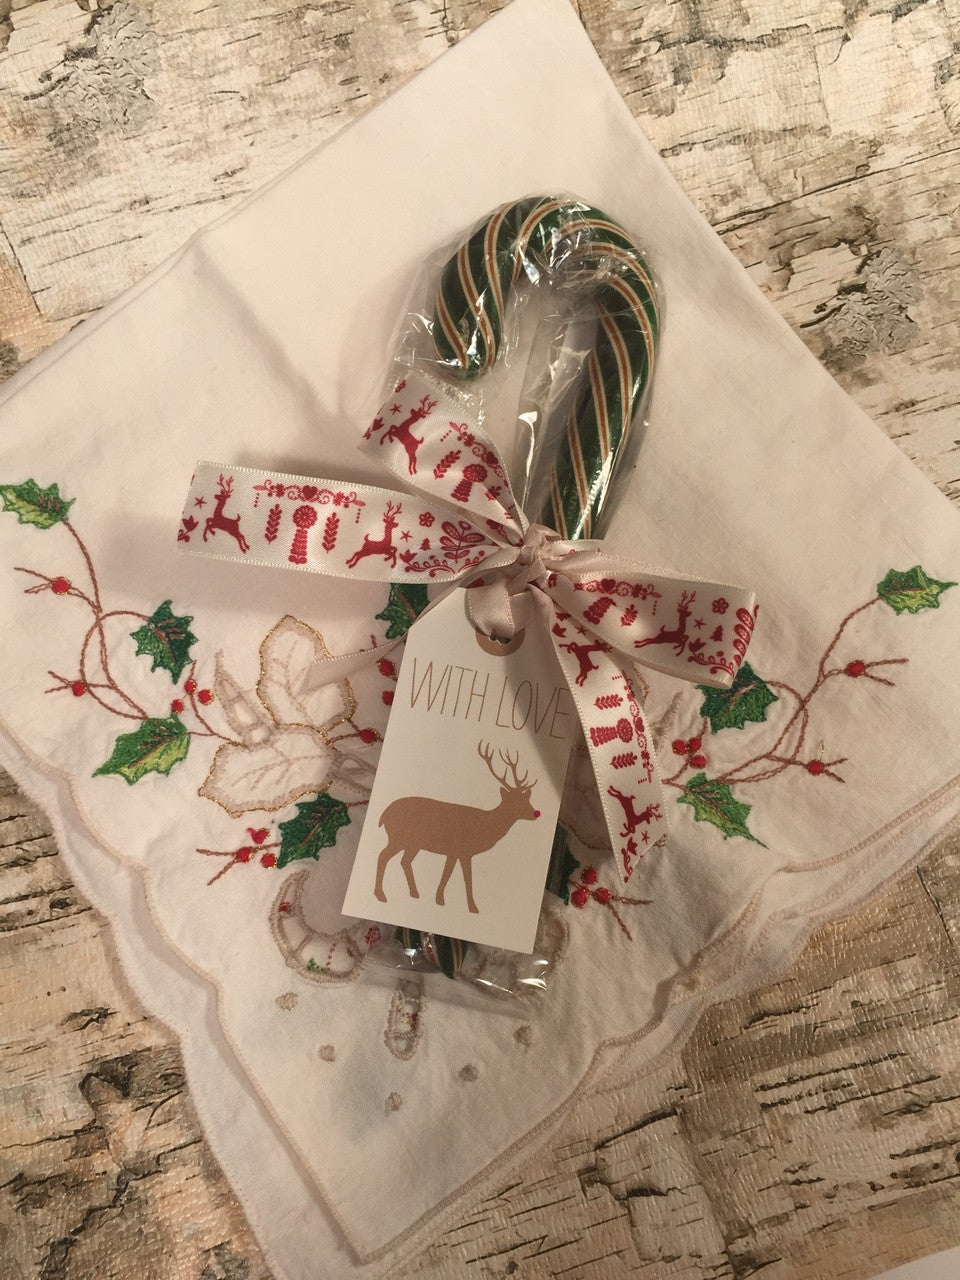 The perfect place setting makes your guests so impressed with your hosting skills! Tie our Nordic ribbon on a candy cane along placed atop a festive napkin to make your table extra elegant!